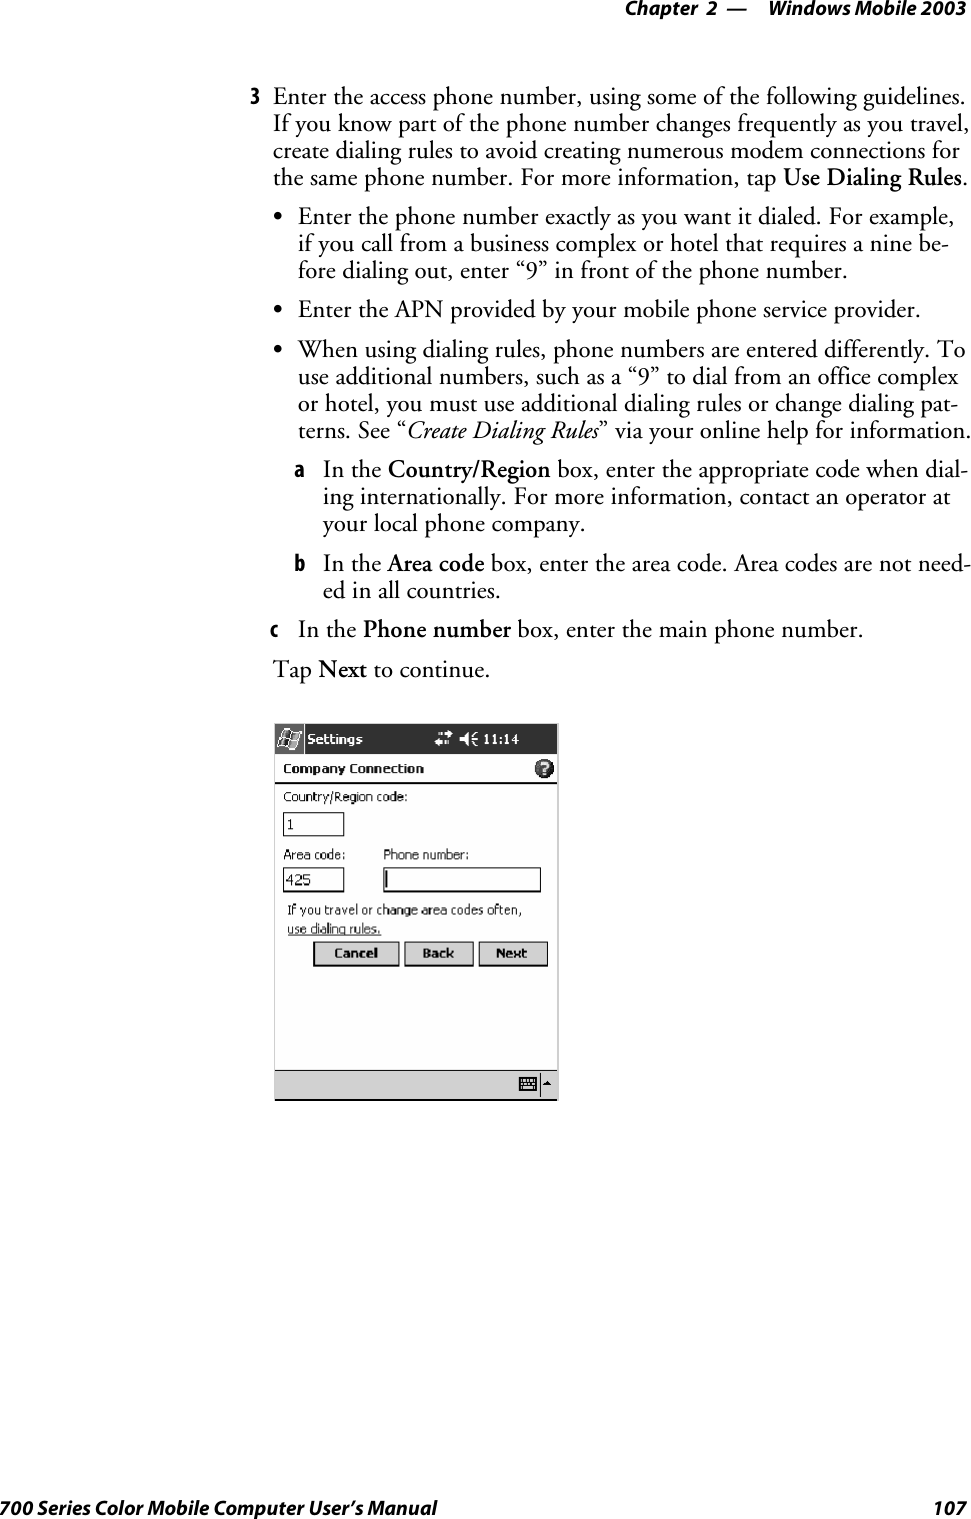 Windows Mobile 2003—Chapter 2107700 Series Color Mobile Computer User’s Manual3Enter the access phone number, using some of the following guidelines.If you know part of the phone number changes frequently as you travel,create dialing rules to avoid creating numerous modem connections forthe same phone number. For more information, tap Use Dialing Rules.SEnterthephonenumberexactlyasyouwantitdialed.Forexample,if you call from a business complex or hotel that requires a nine be-fore dialing out, enter “9” in front of the phone number.SEnter the APN provided by your mobile phone service provider.SWhen using dialing rules, phone numbers are entered differently. Touse additional numbers, such as a “9” to dial from an office complexor hotel, you must use additional dialing rules or change dialing pat-terns. See “Create Dialing Rules” via your online help for information.aIn the Country/Region box, enter the appropriate code when dial-ing internationally. For more information, contact an operator atyour local phone company.bIn the Area code box, enter the area code. Area codes are not need-ed in all countries.cIn the Phone number box, enter the main phone number.Tap Next to continue.